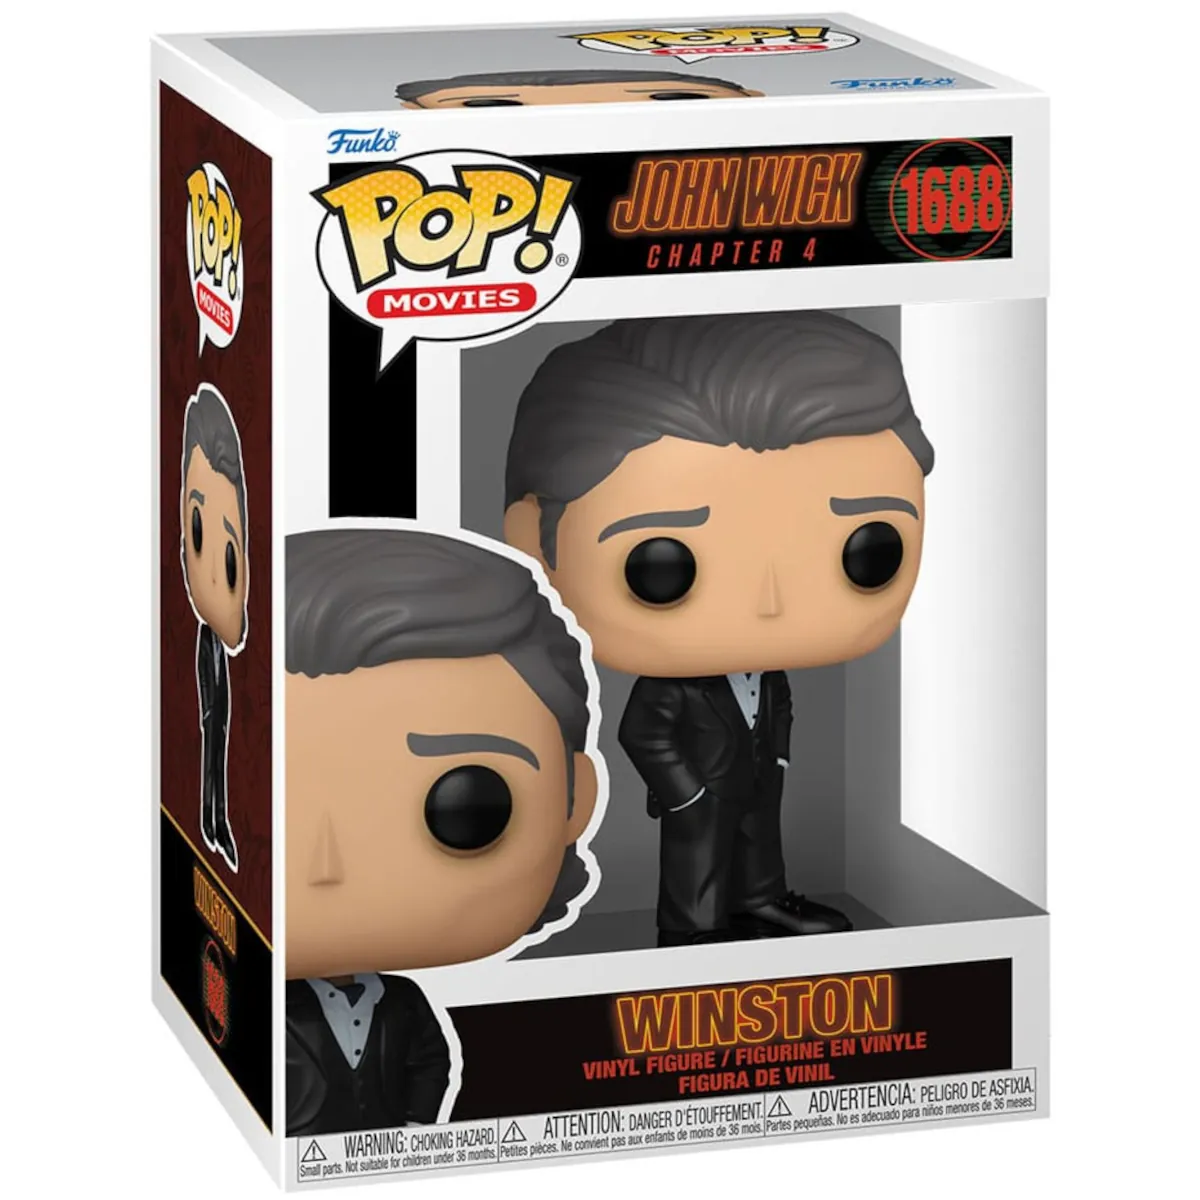 76104 Funko Pop! Movies - John Wick Chapter 4 - Winston Collectable Vinyl Figure Box Front